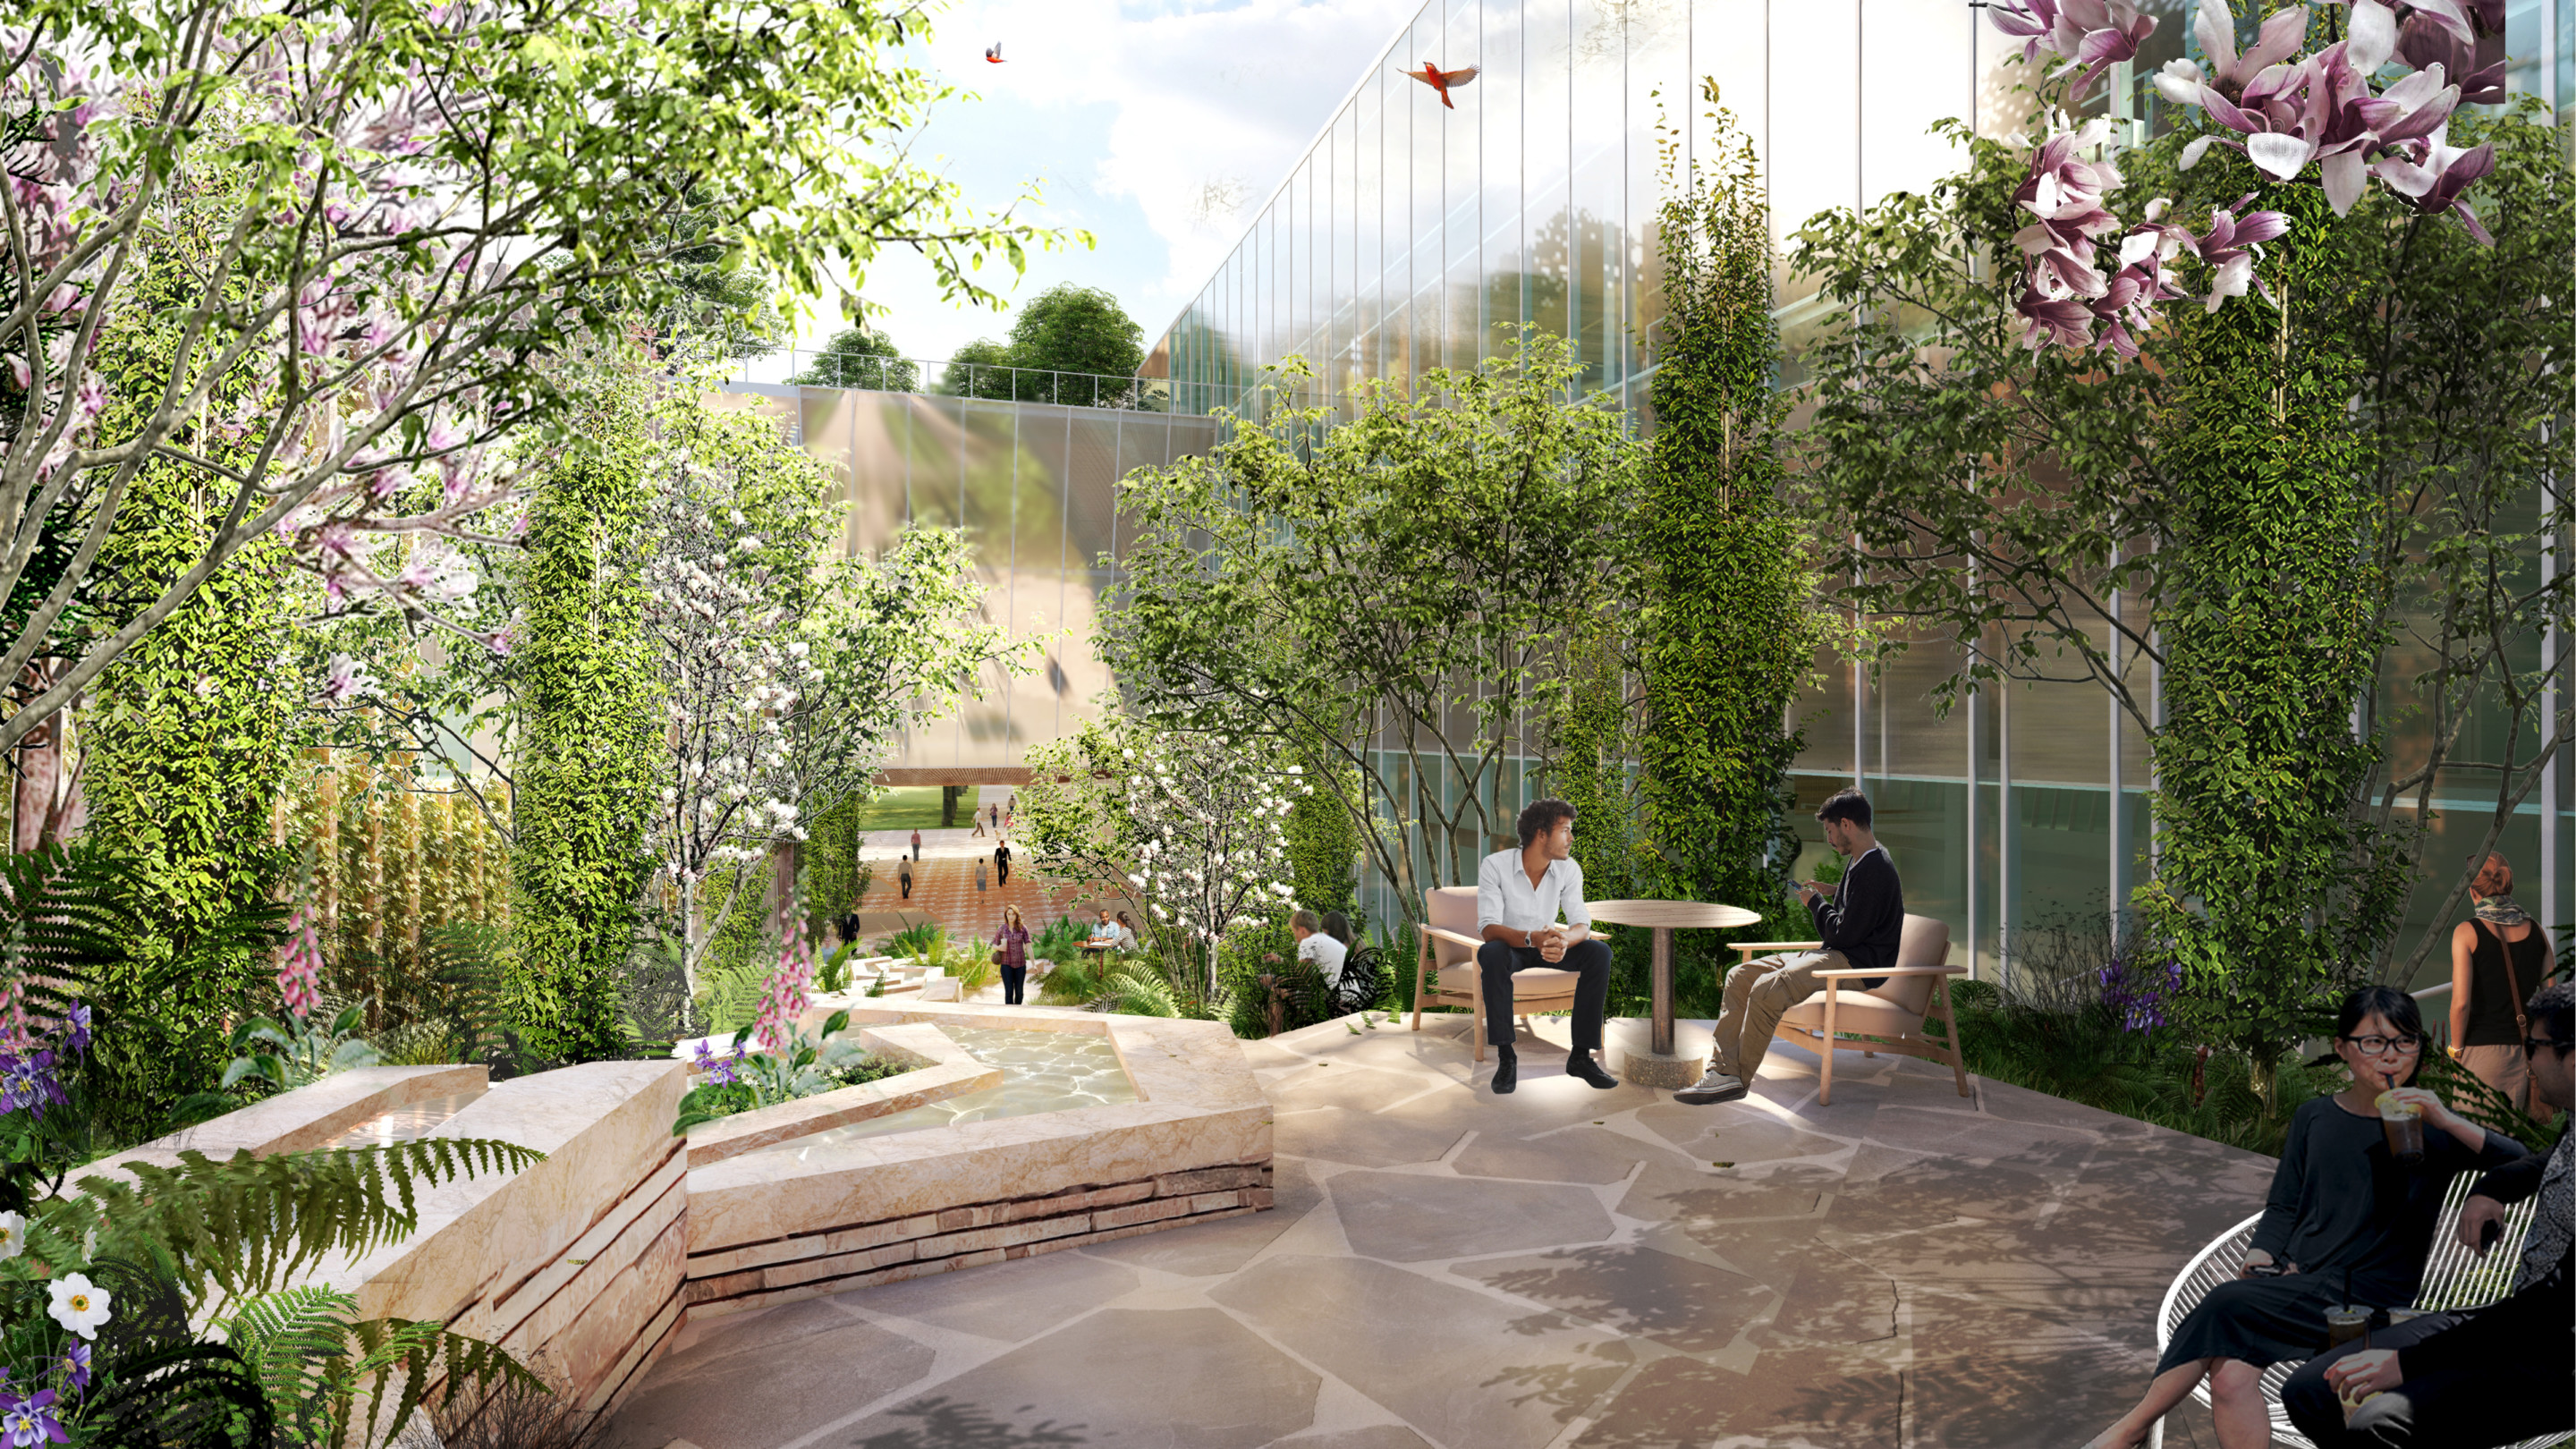 rendering of a cafe sit within a lush rooftop garden